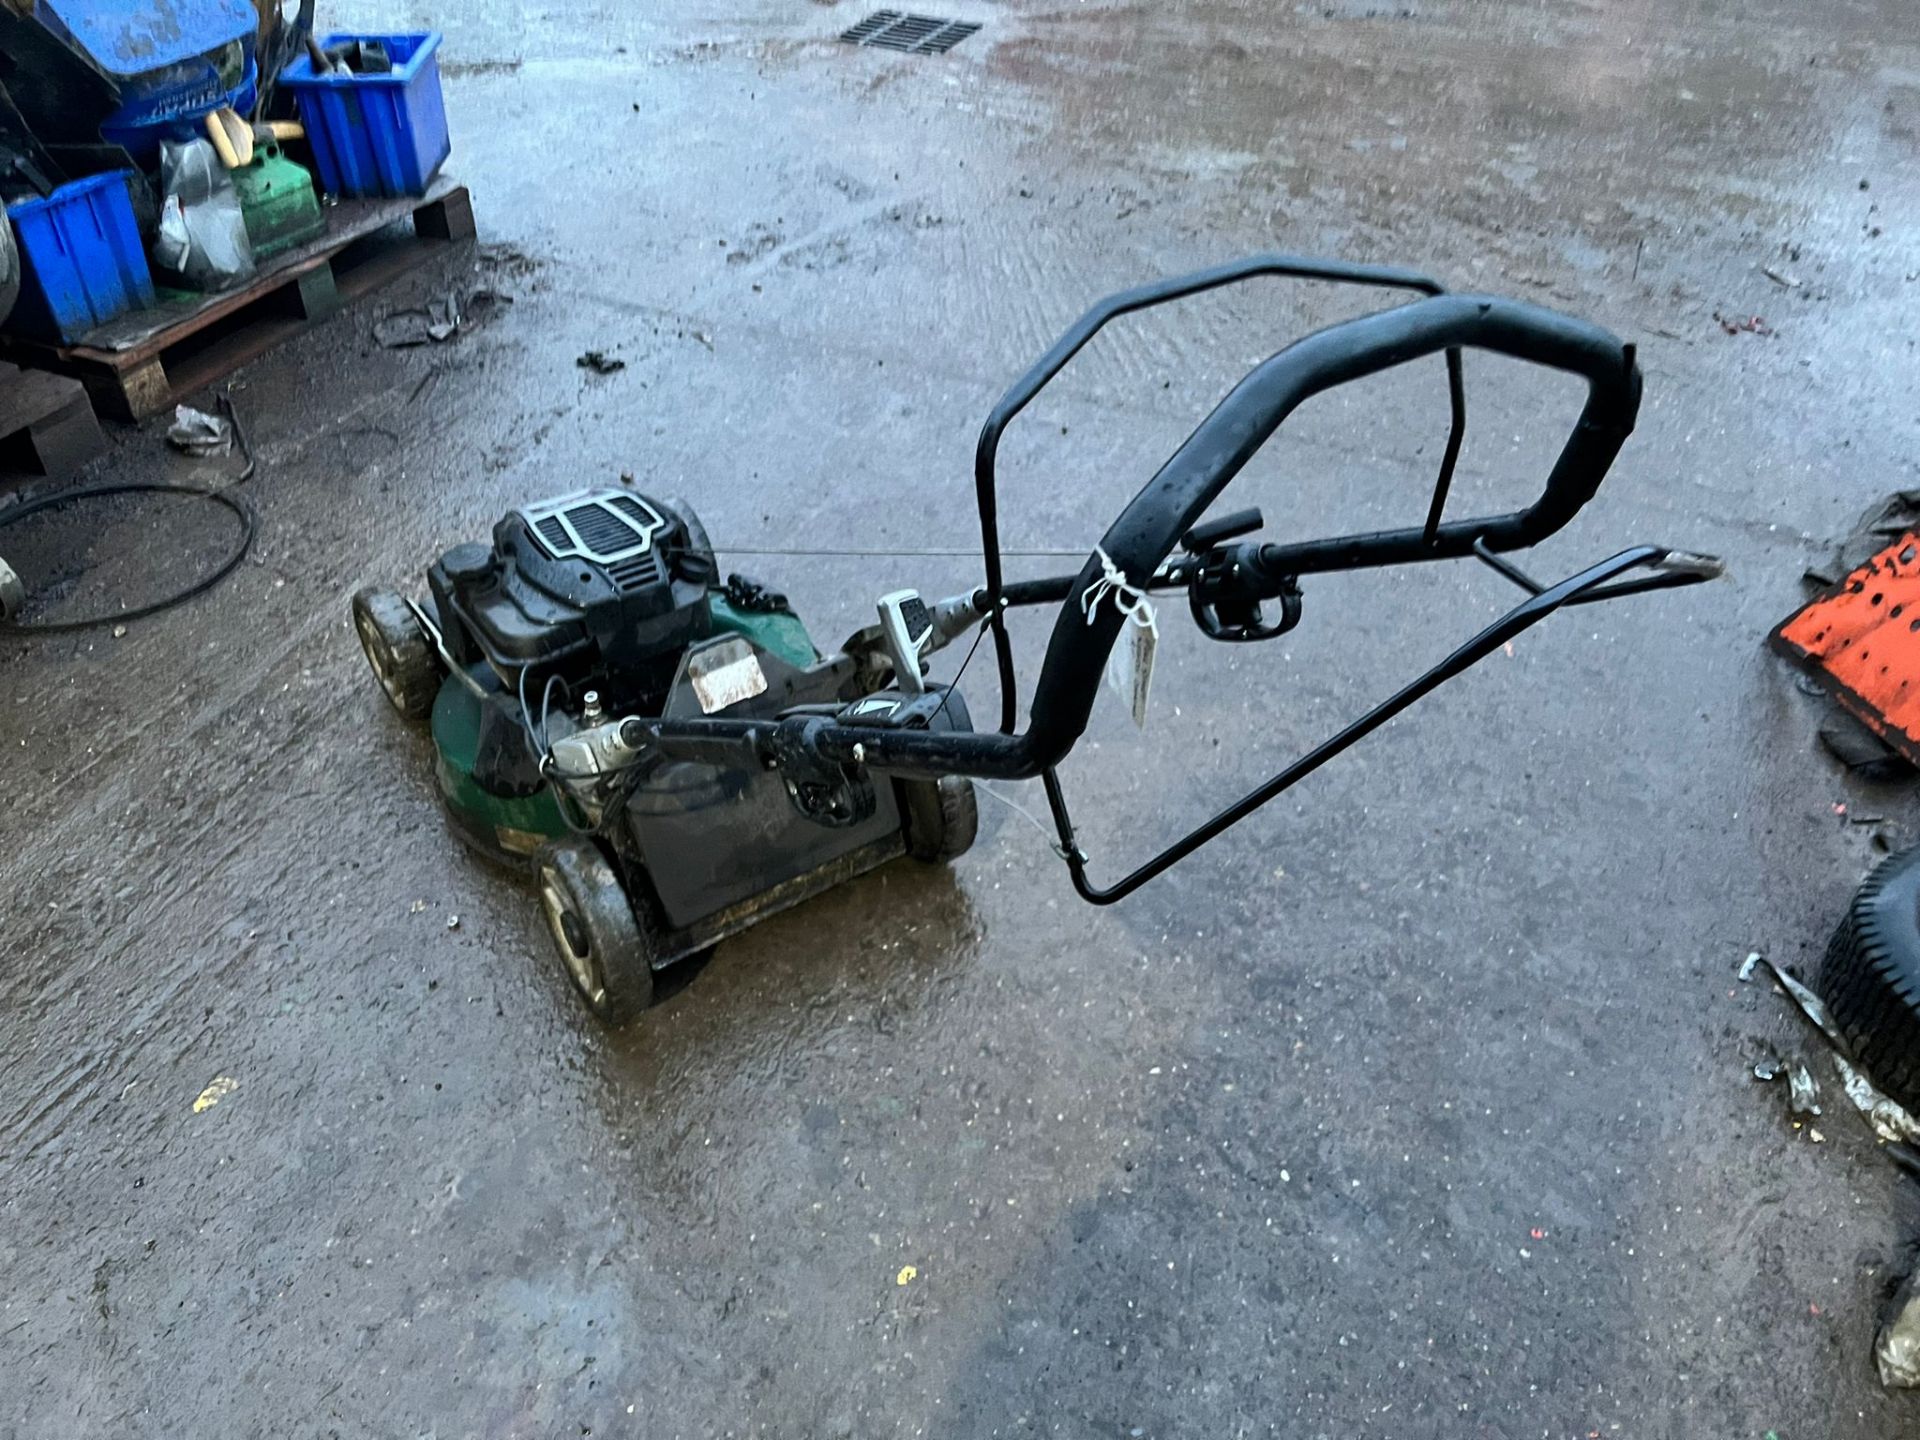 2018 ATCO QUATTRO 22SV SELF PROPELLED LAWN MOWER, GOOD COMPRESSION, SELF PROPELLED *NO VAT* - Image 4 of 7